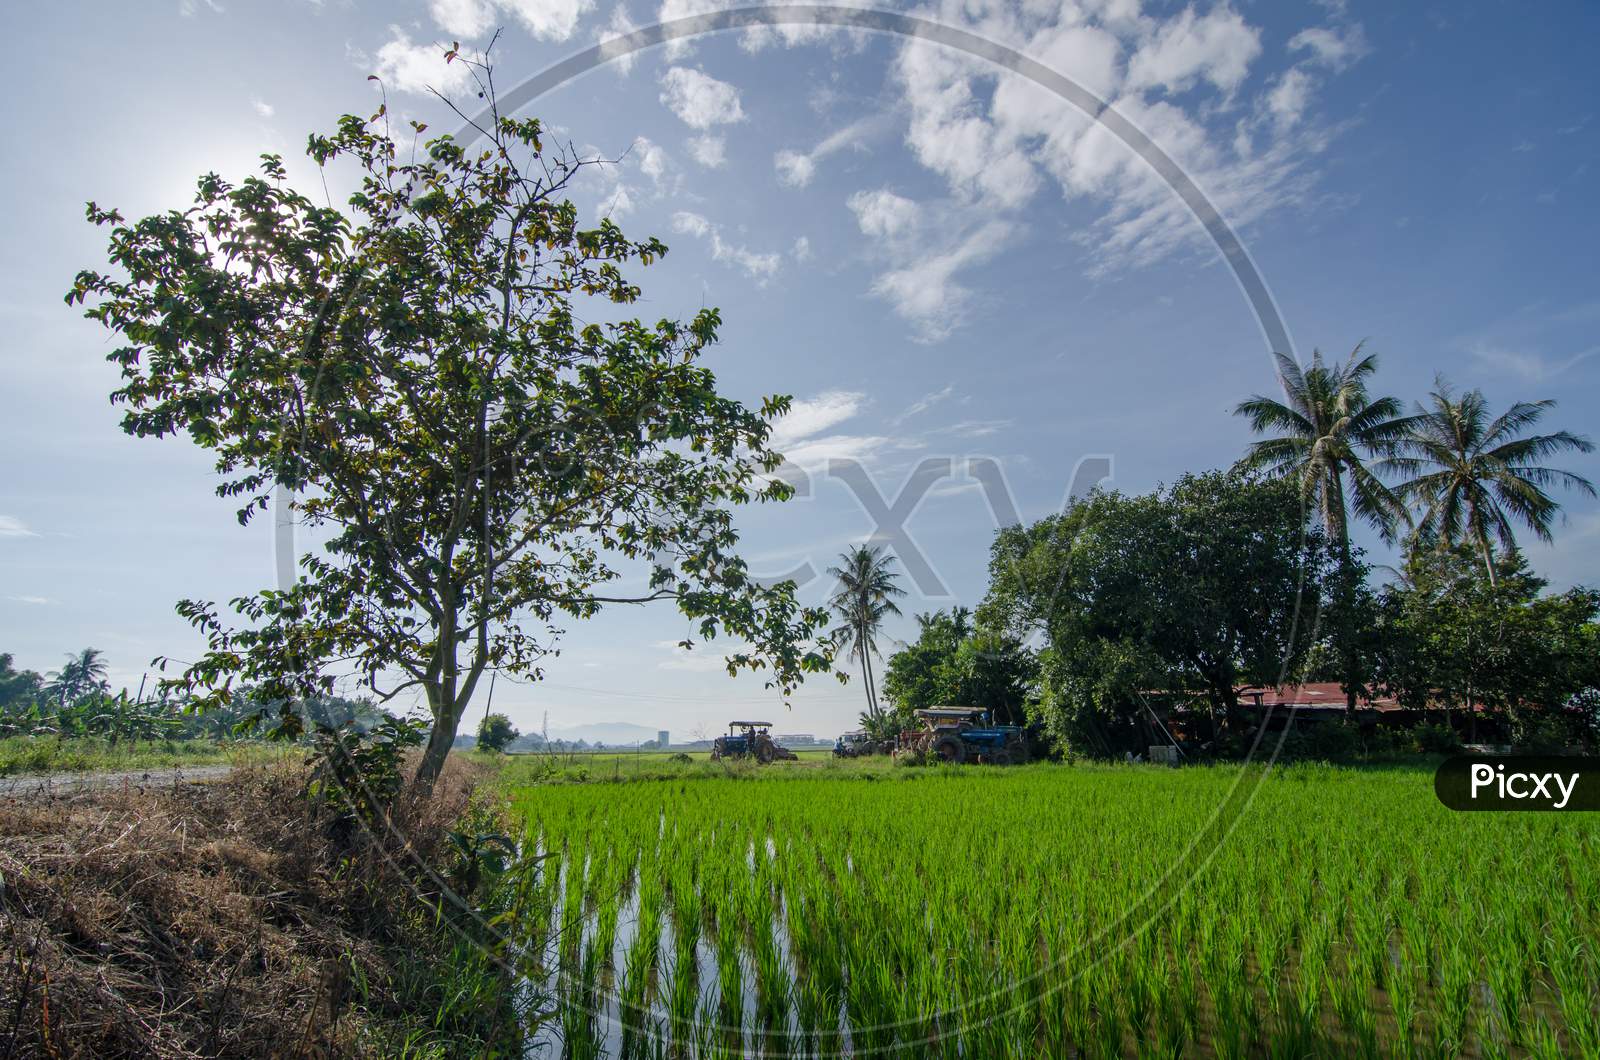 Paddy Field With A Tree And Tractor In The Morning.